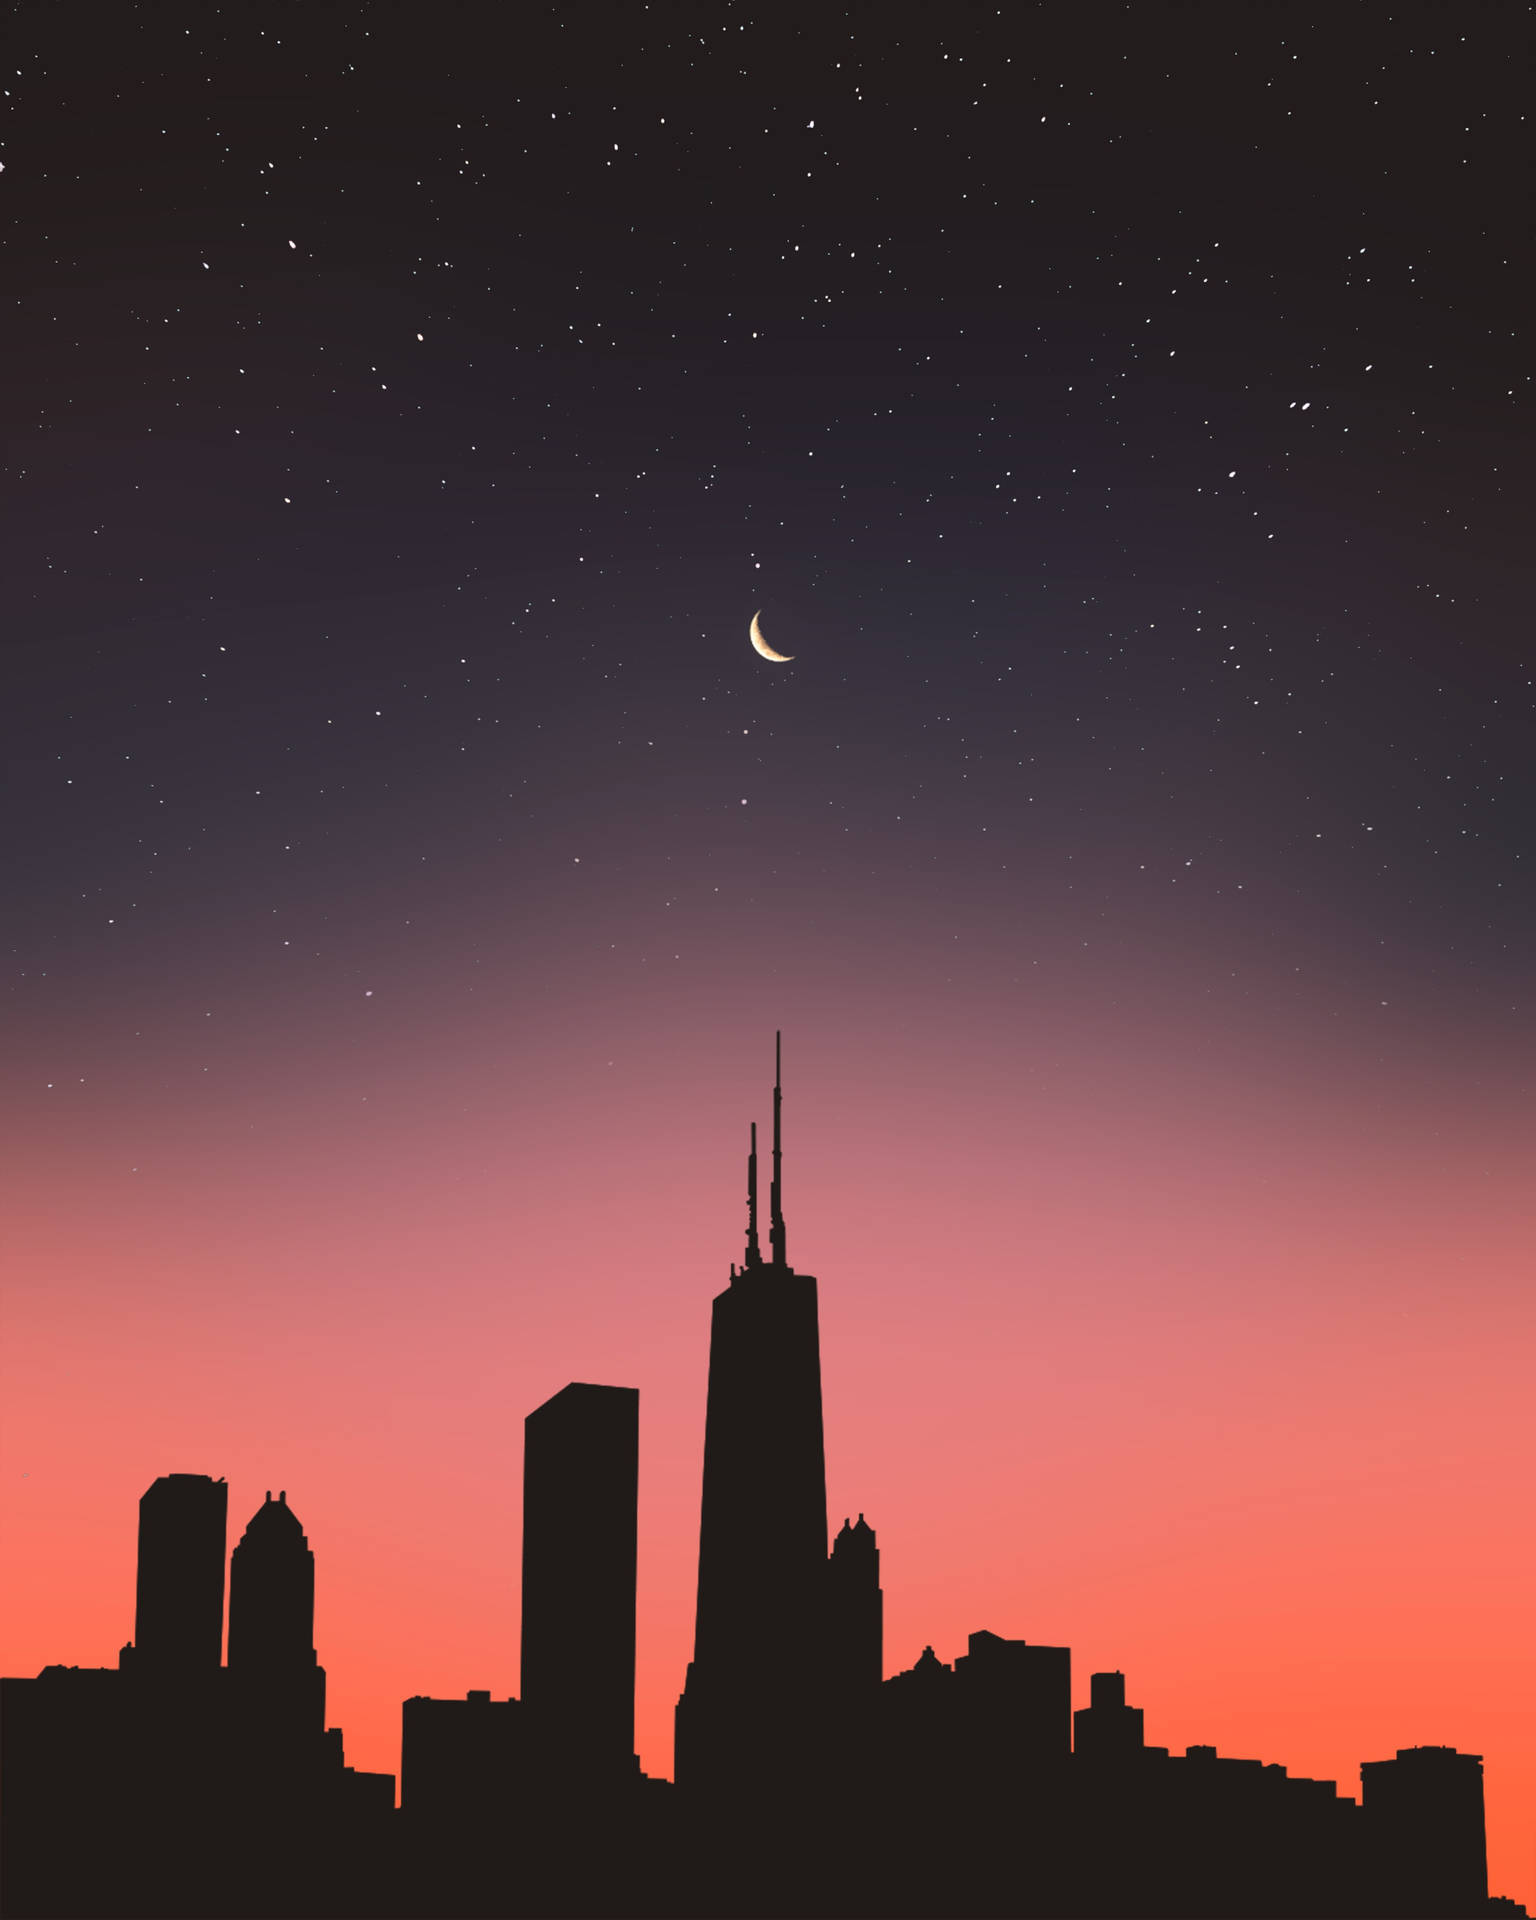 Silhouette Cityscape And Starry Night Wallpaper